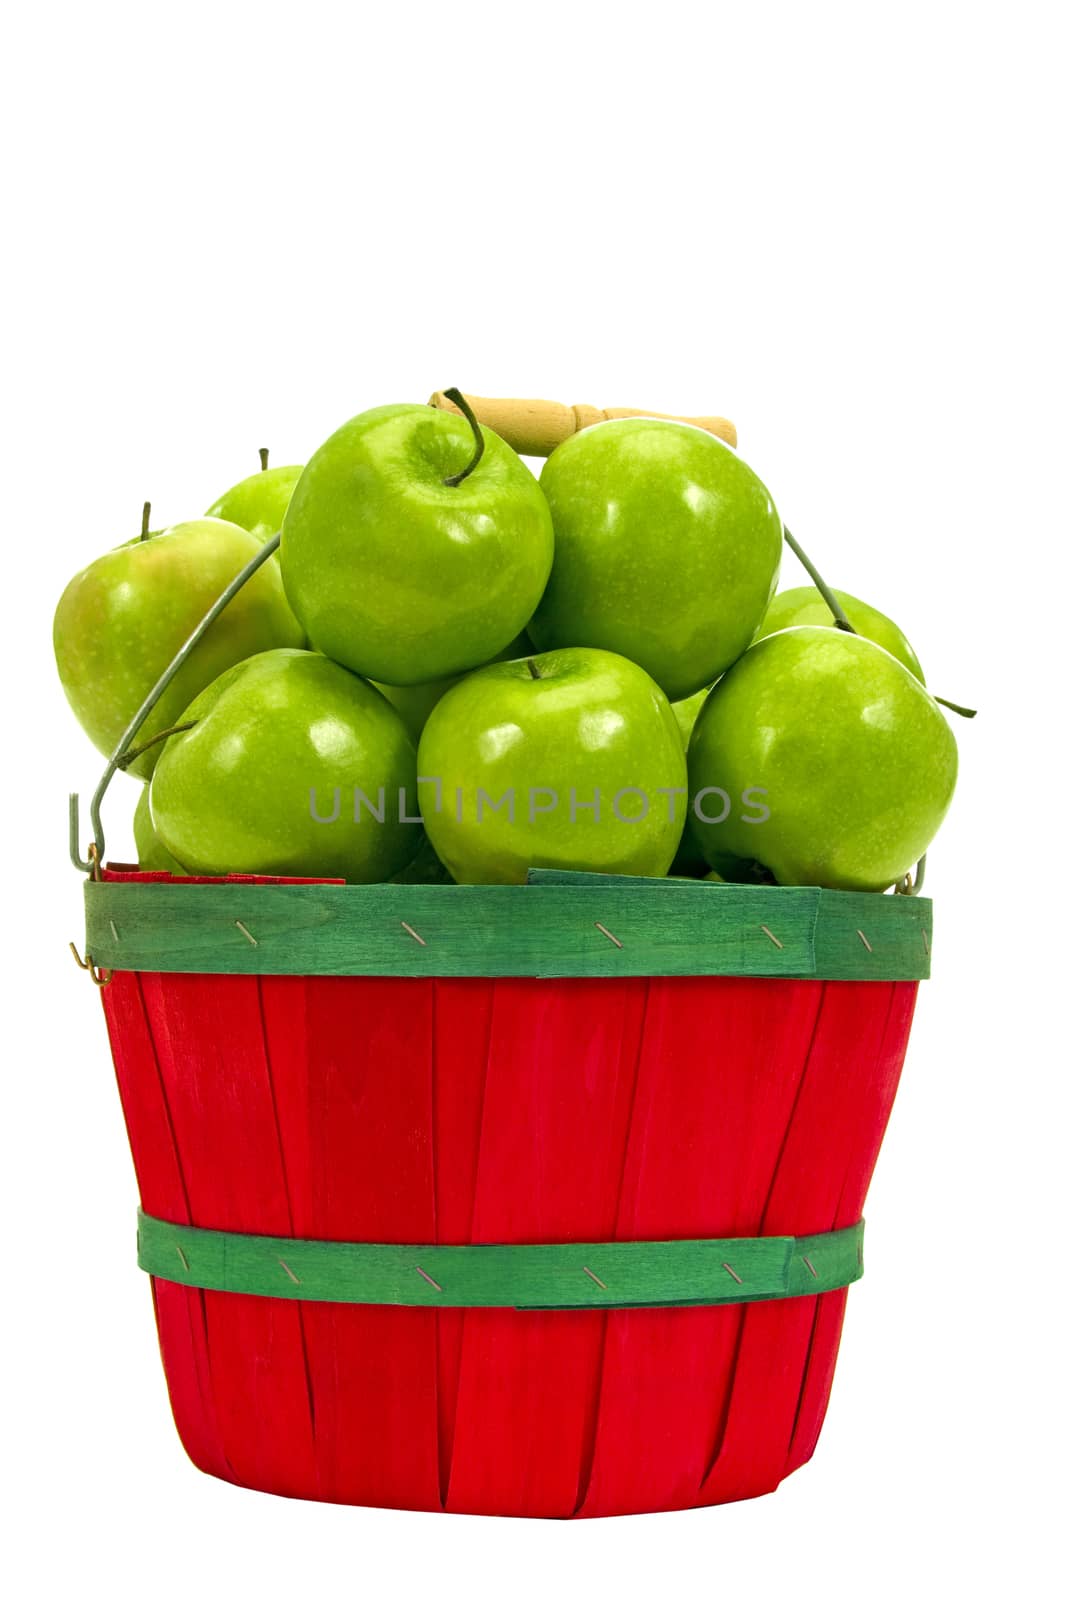 Small Basket Of Green Apples Isolated by stockbuster1